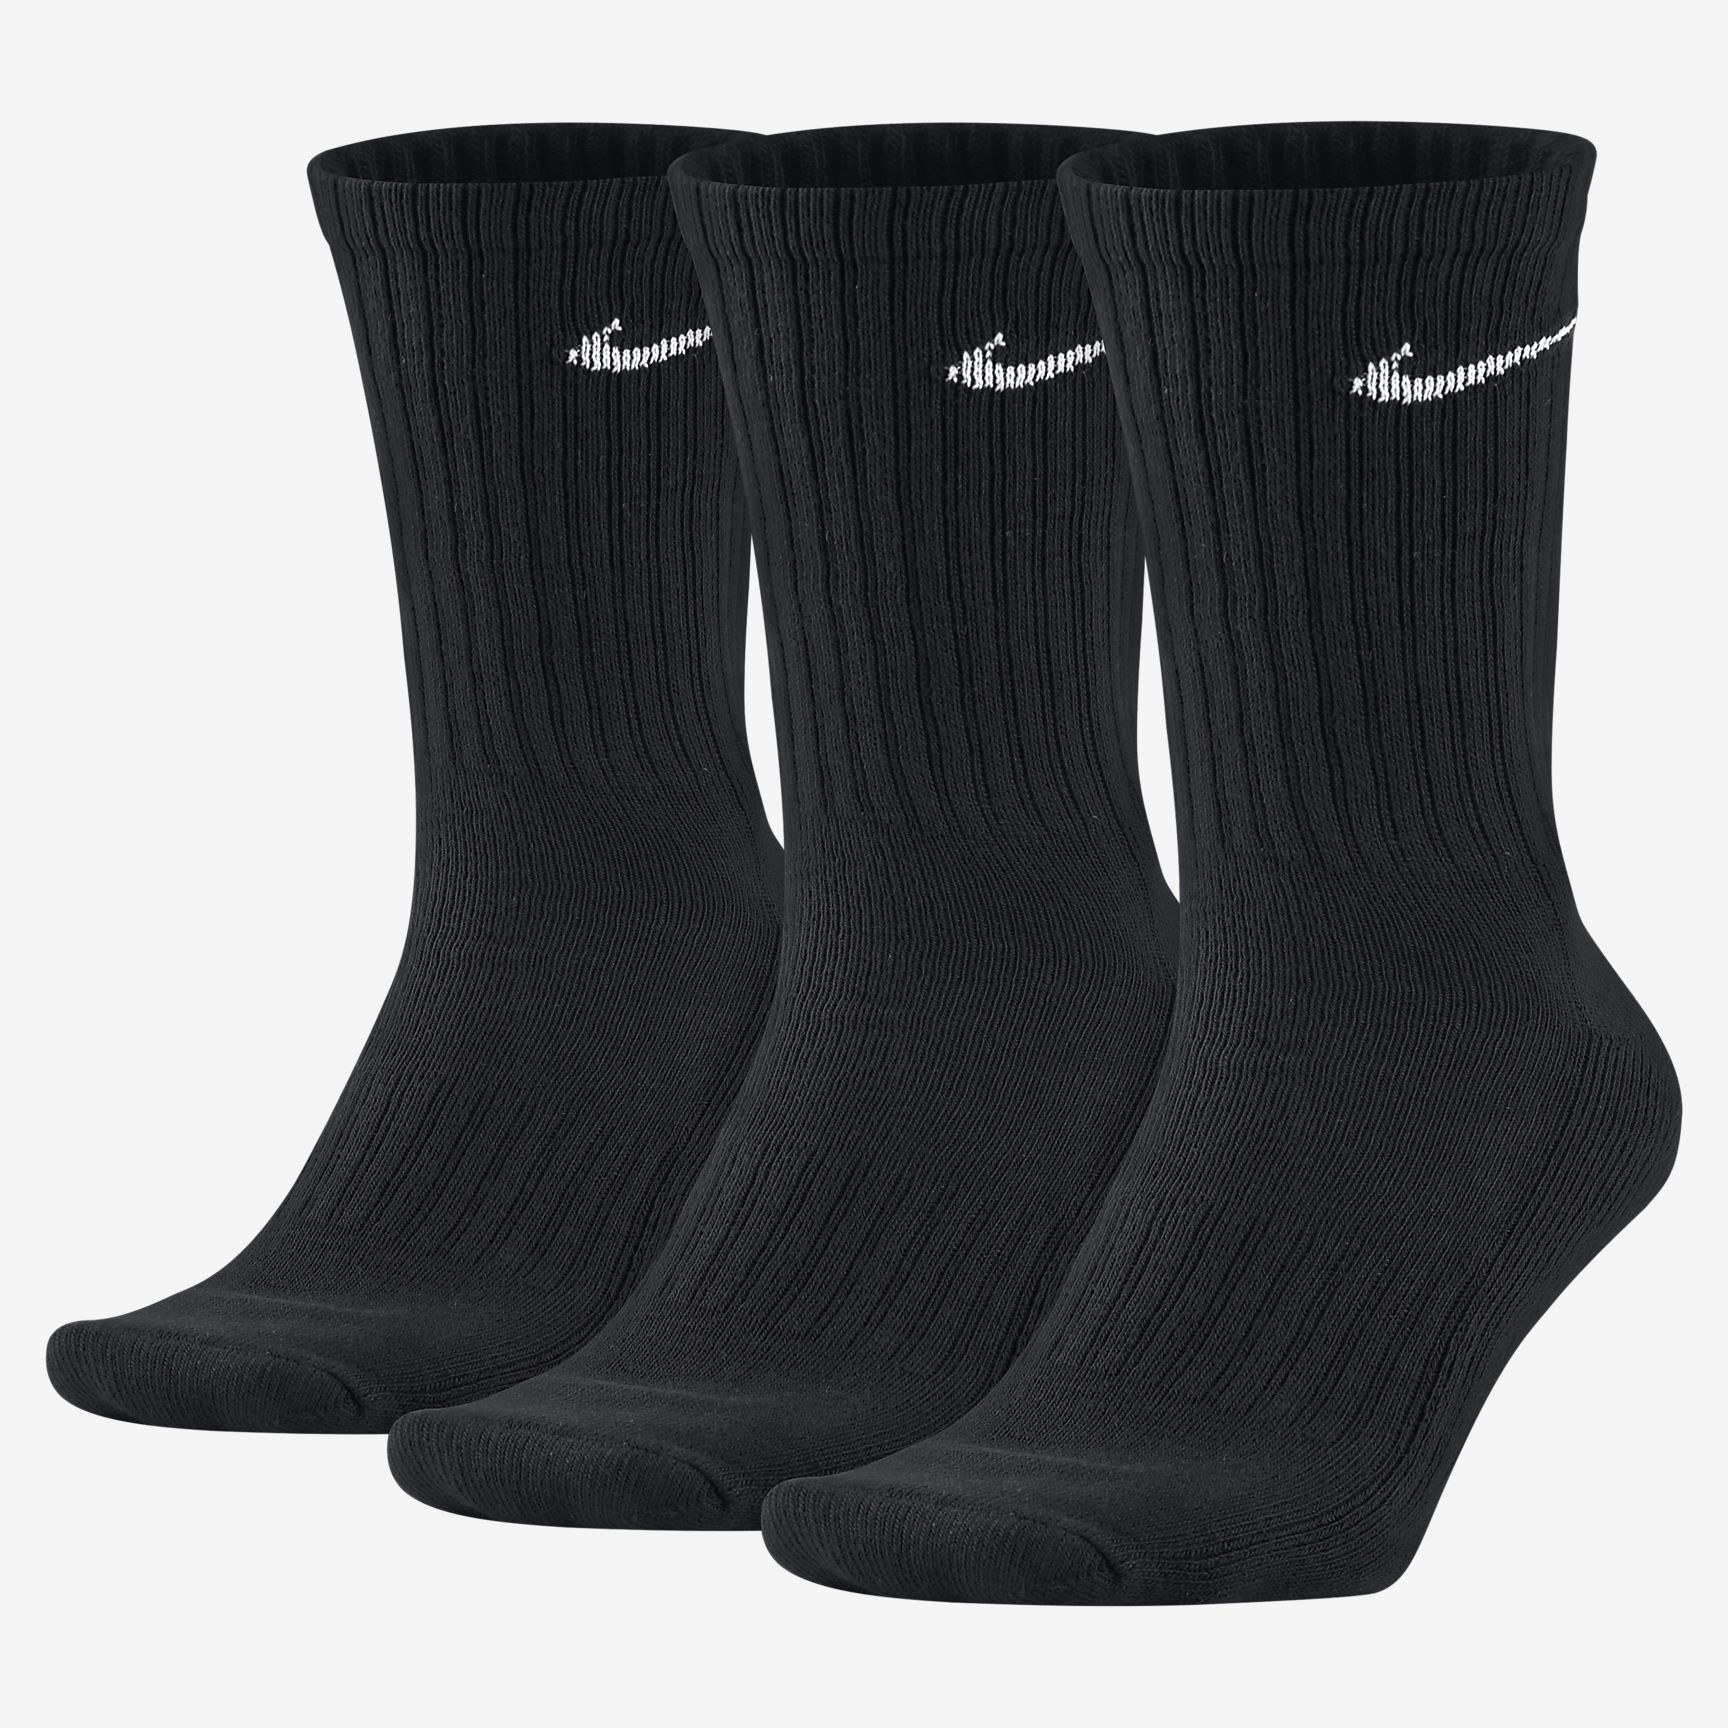 Nike Cushioned Chaussettes mi-mollet (3 paires), Chaussettes, Nike